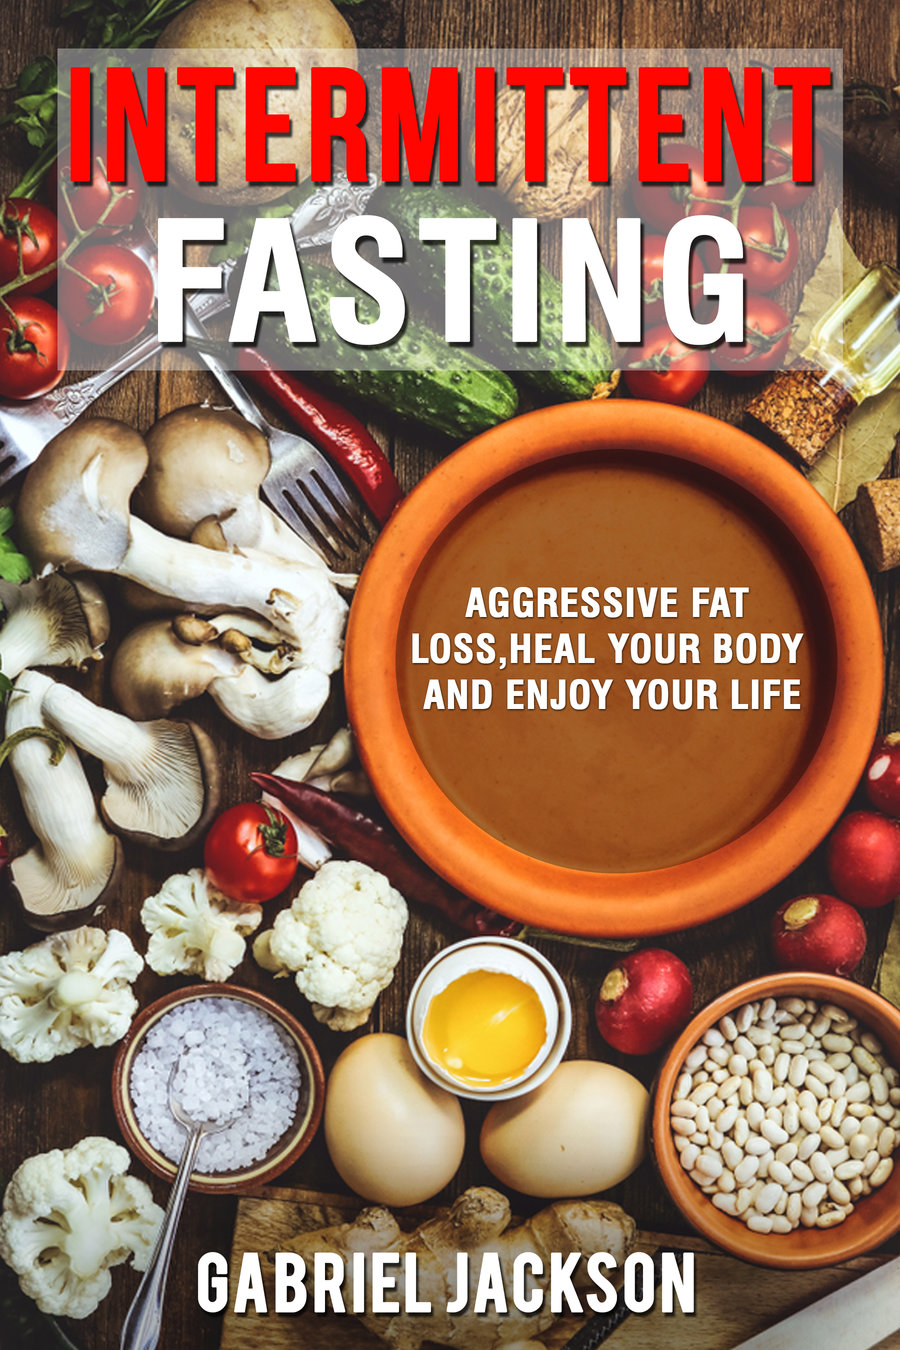 FREE: Intermittent Fasting:Aggressive Fat Loss, Heal Your Body And Enjoy Your Life by Gabriel Jackson by Gabriel Jackson